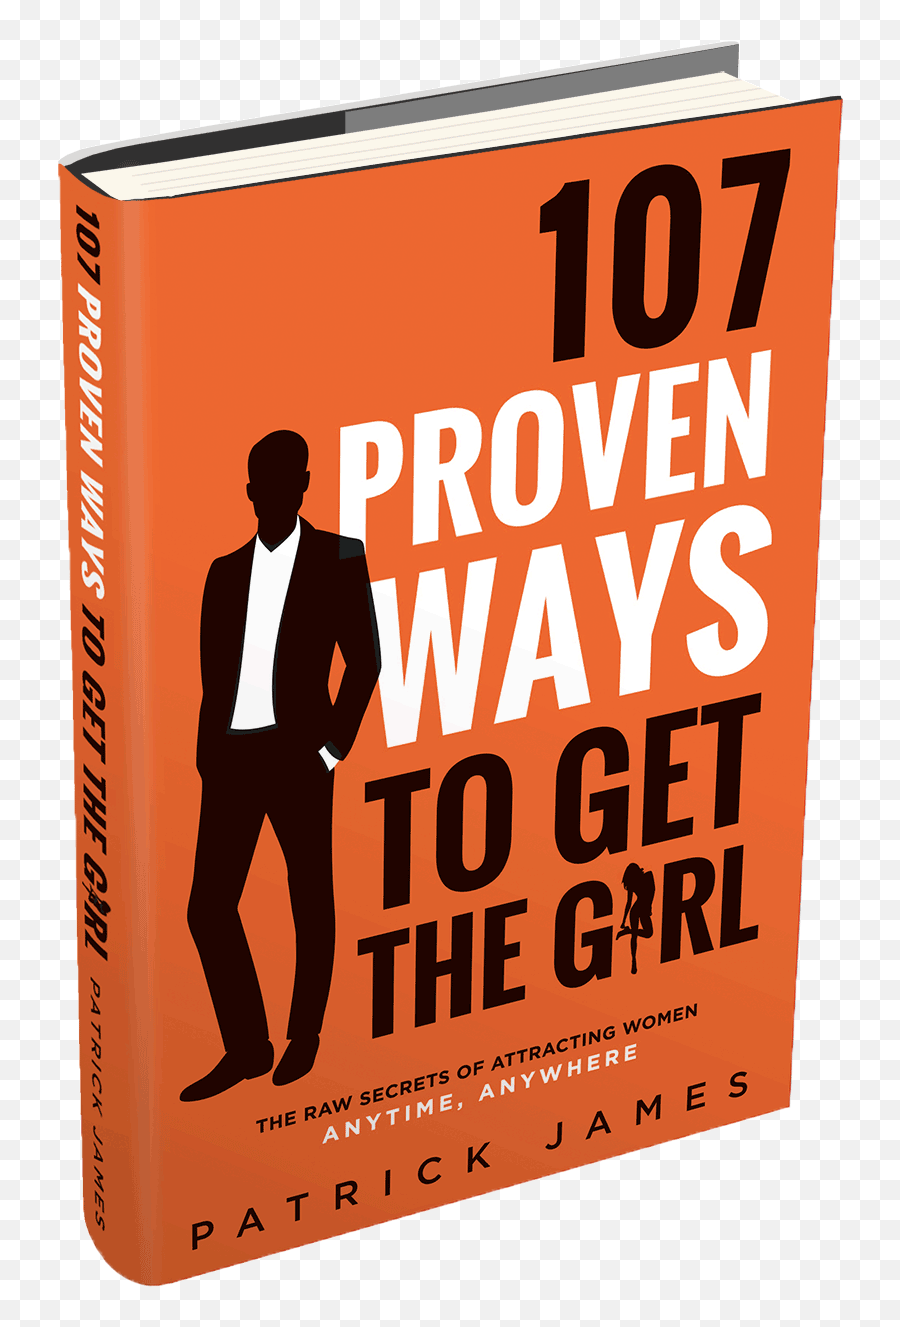 Free Book - 107 Proven Ways To Get The Girl 107 Ways To Get The Girl Emoji,You Go Girl Emoji